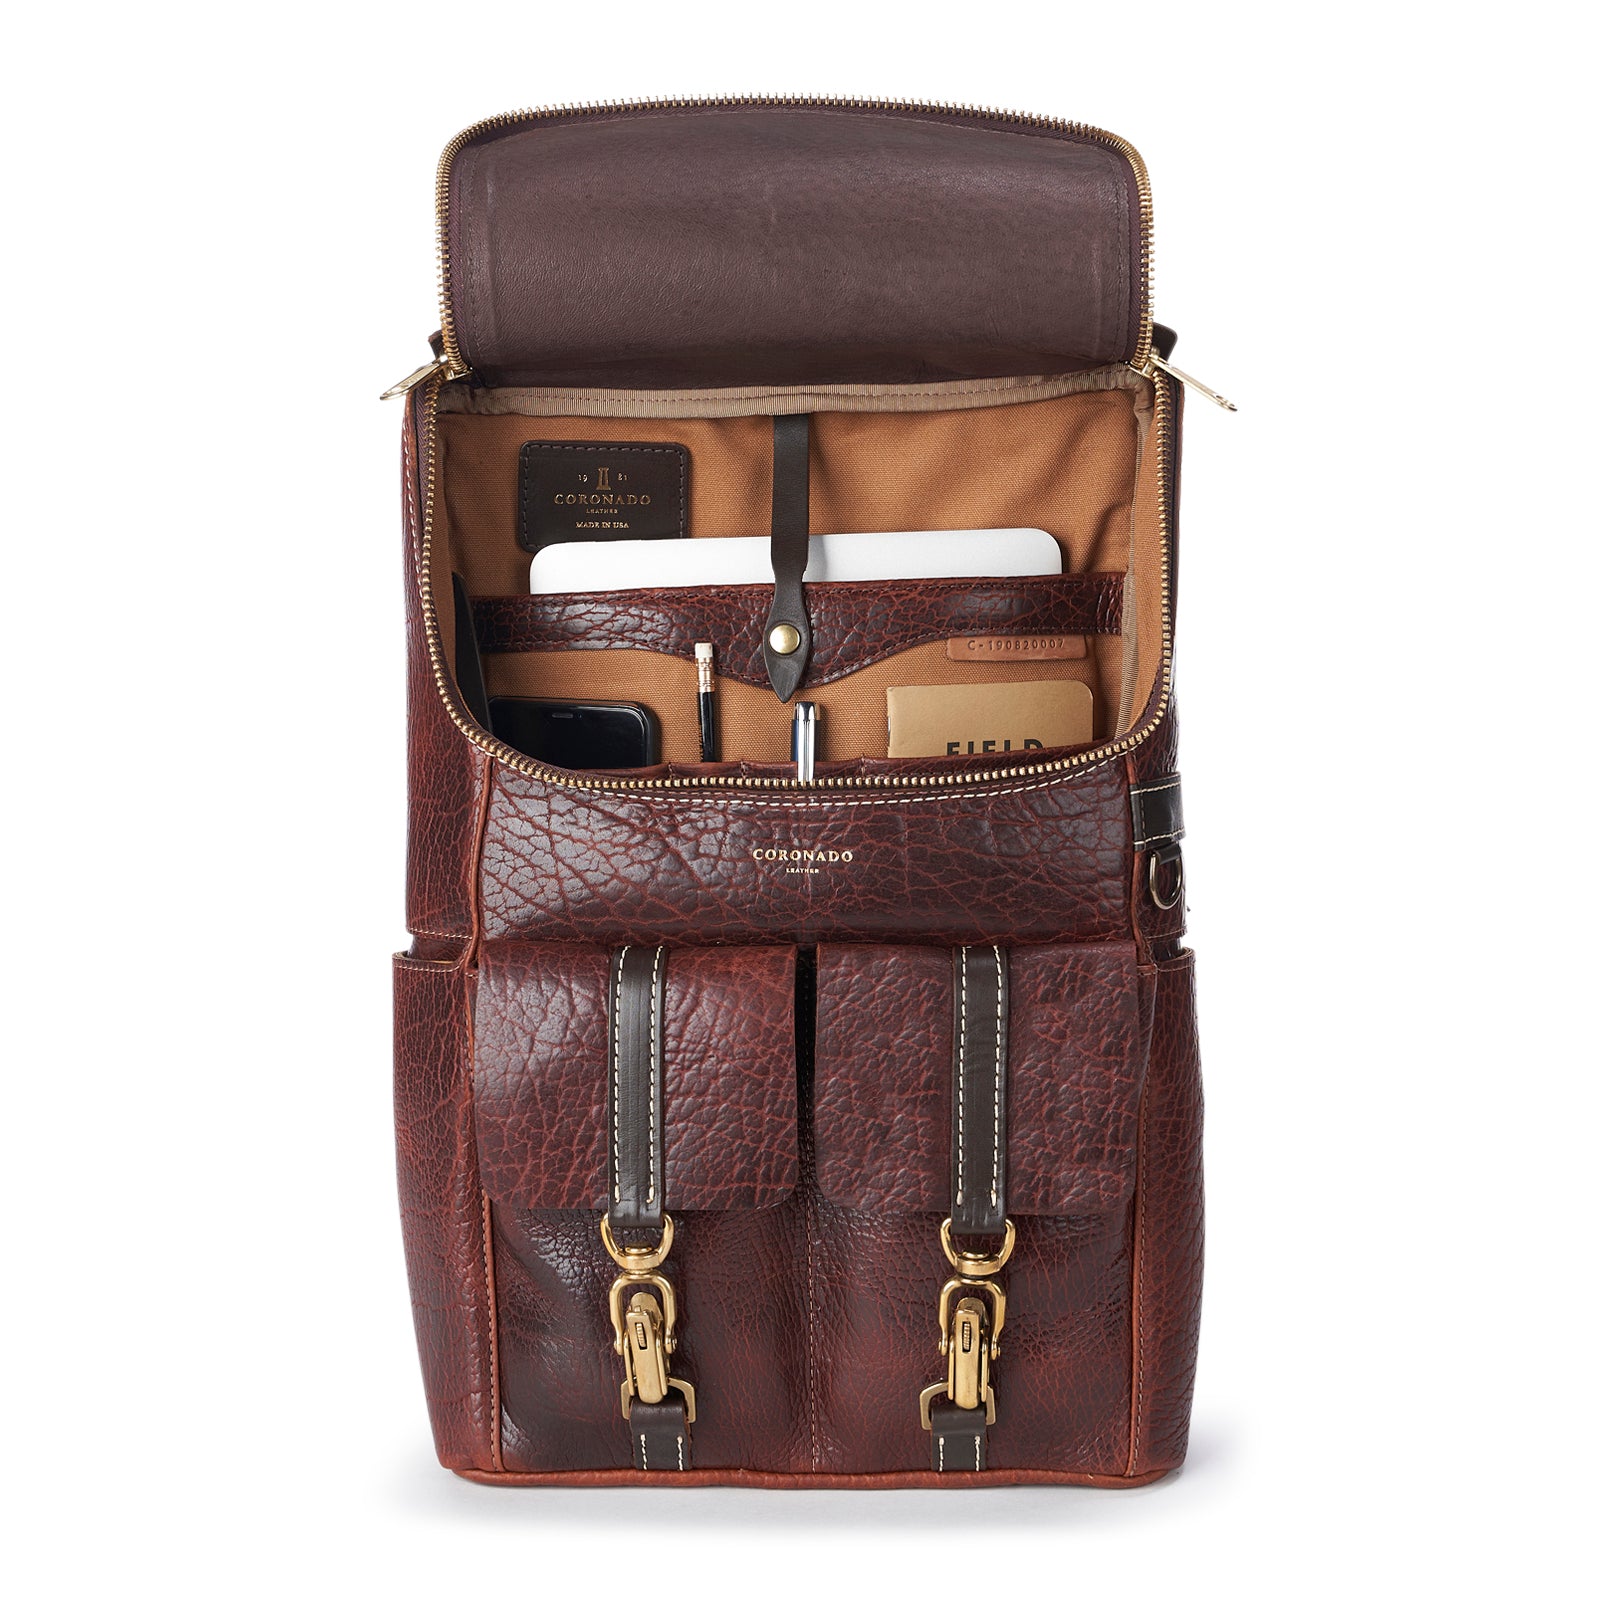 FIREHEAD BACKPACK – Luxury leather goods